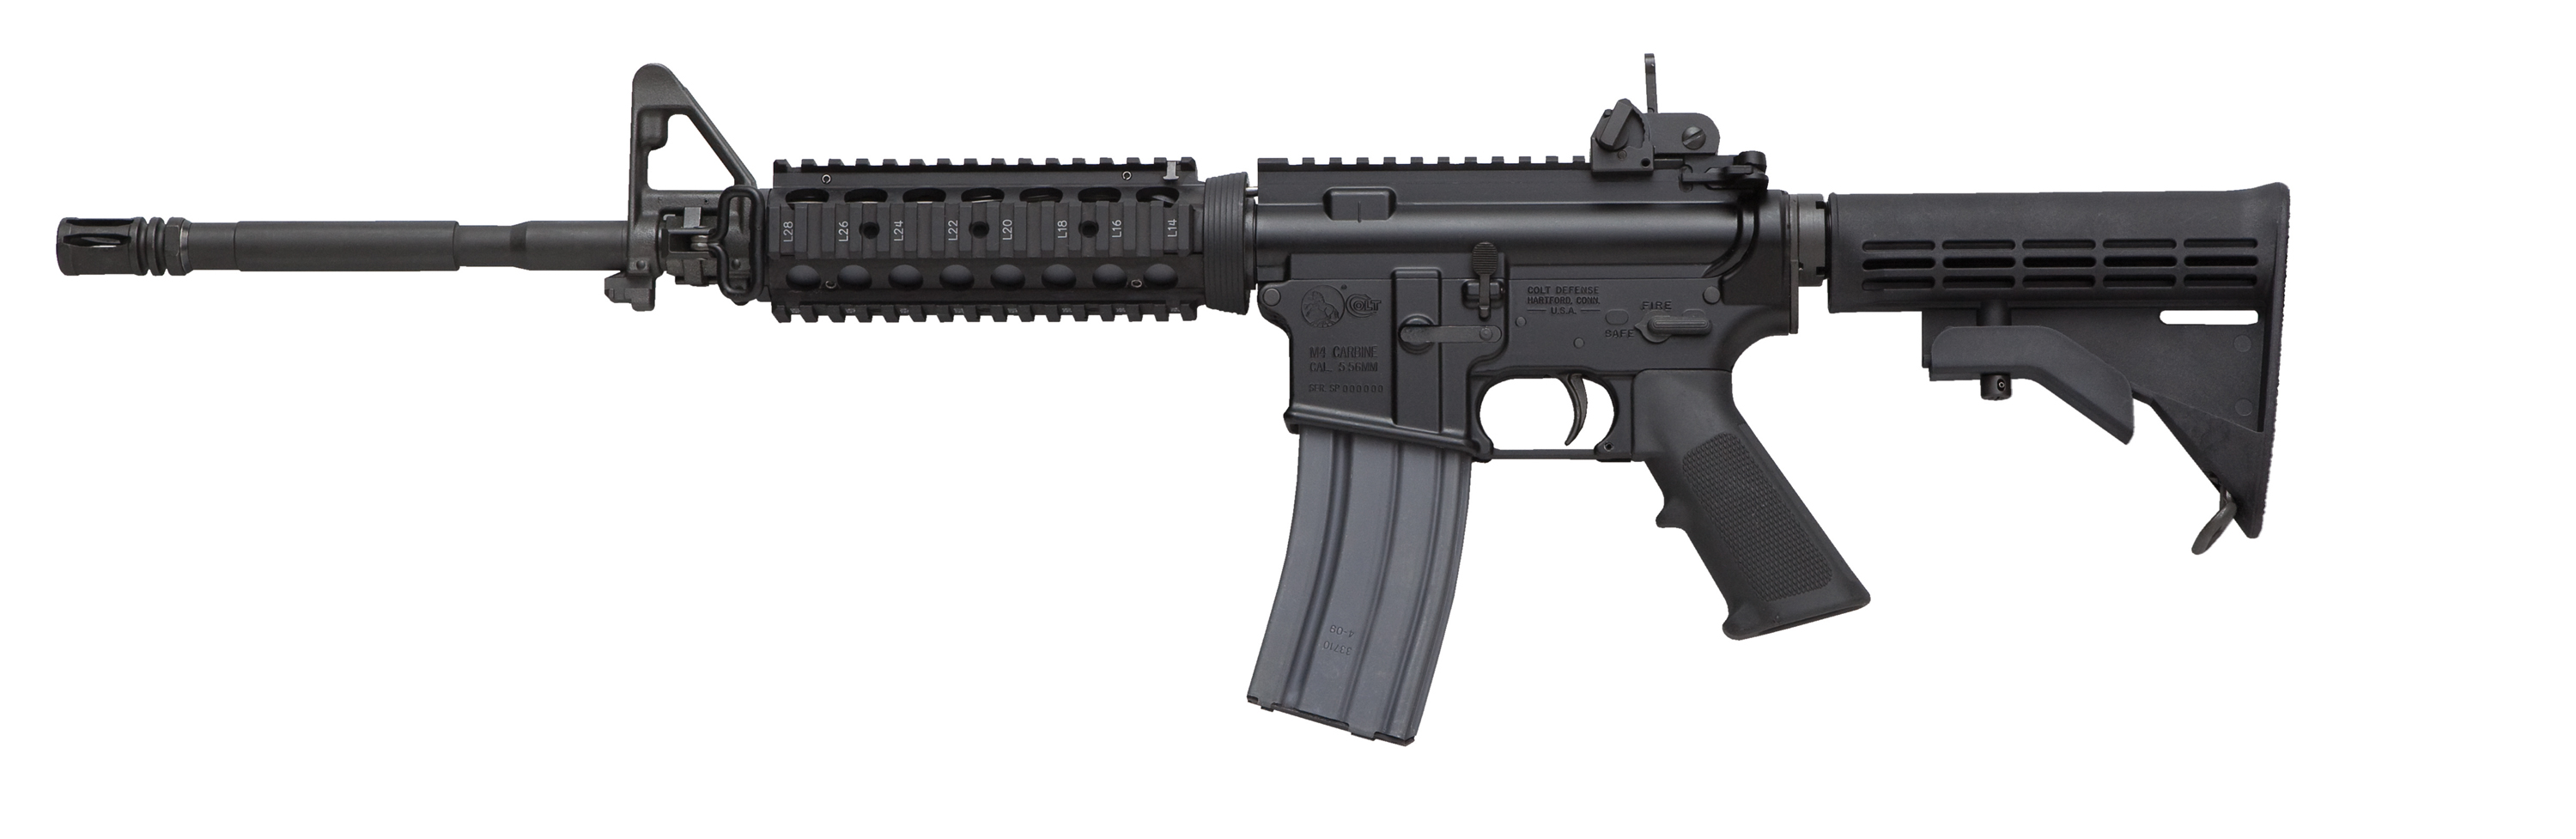 The Colt LESOCOM is the closest thing to the military M4A1 a civilian can purchase.